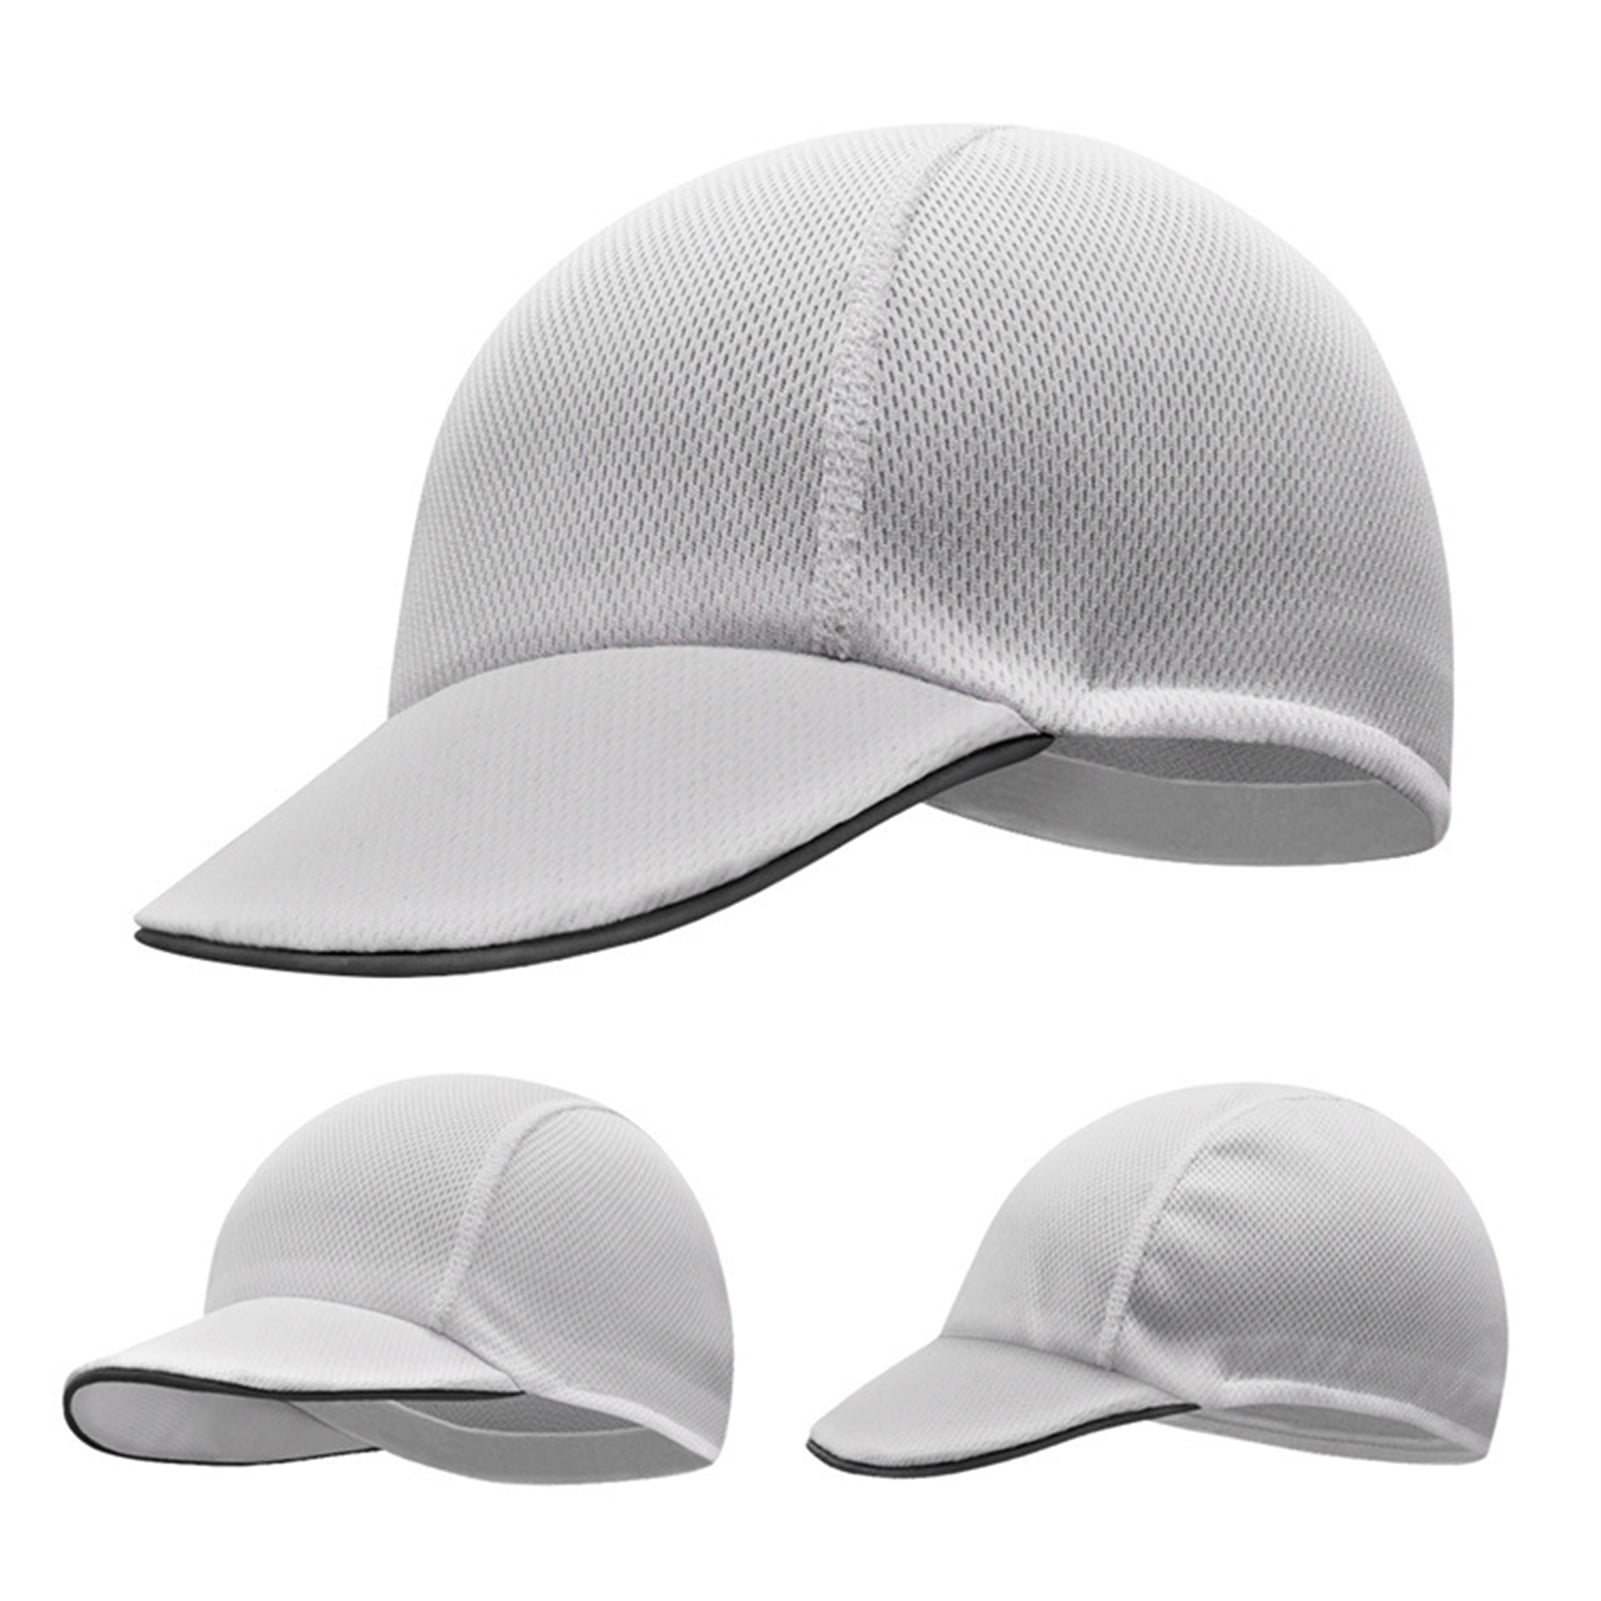 Outdoor Sports Cycling Caps High Breathable Sunscreen Reflective Hats Men Women 